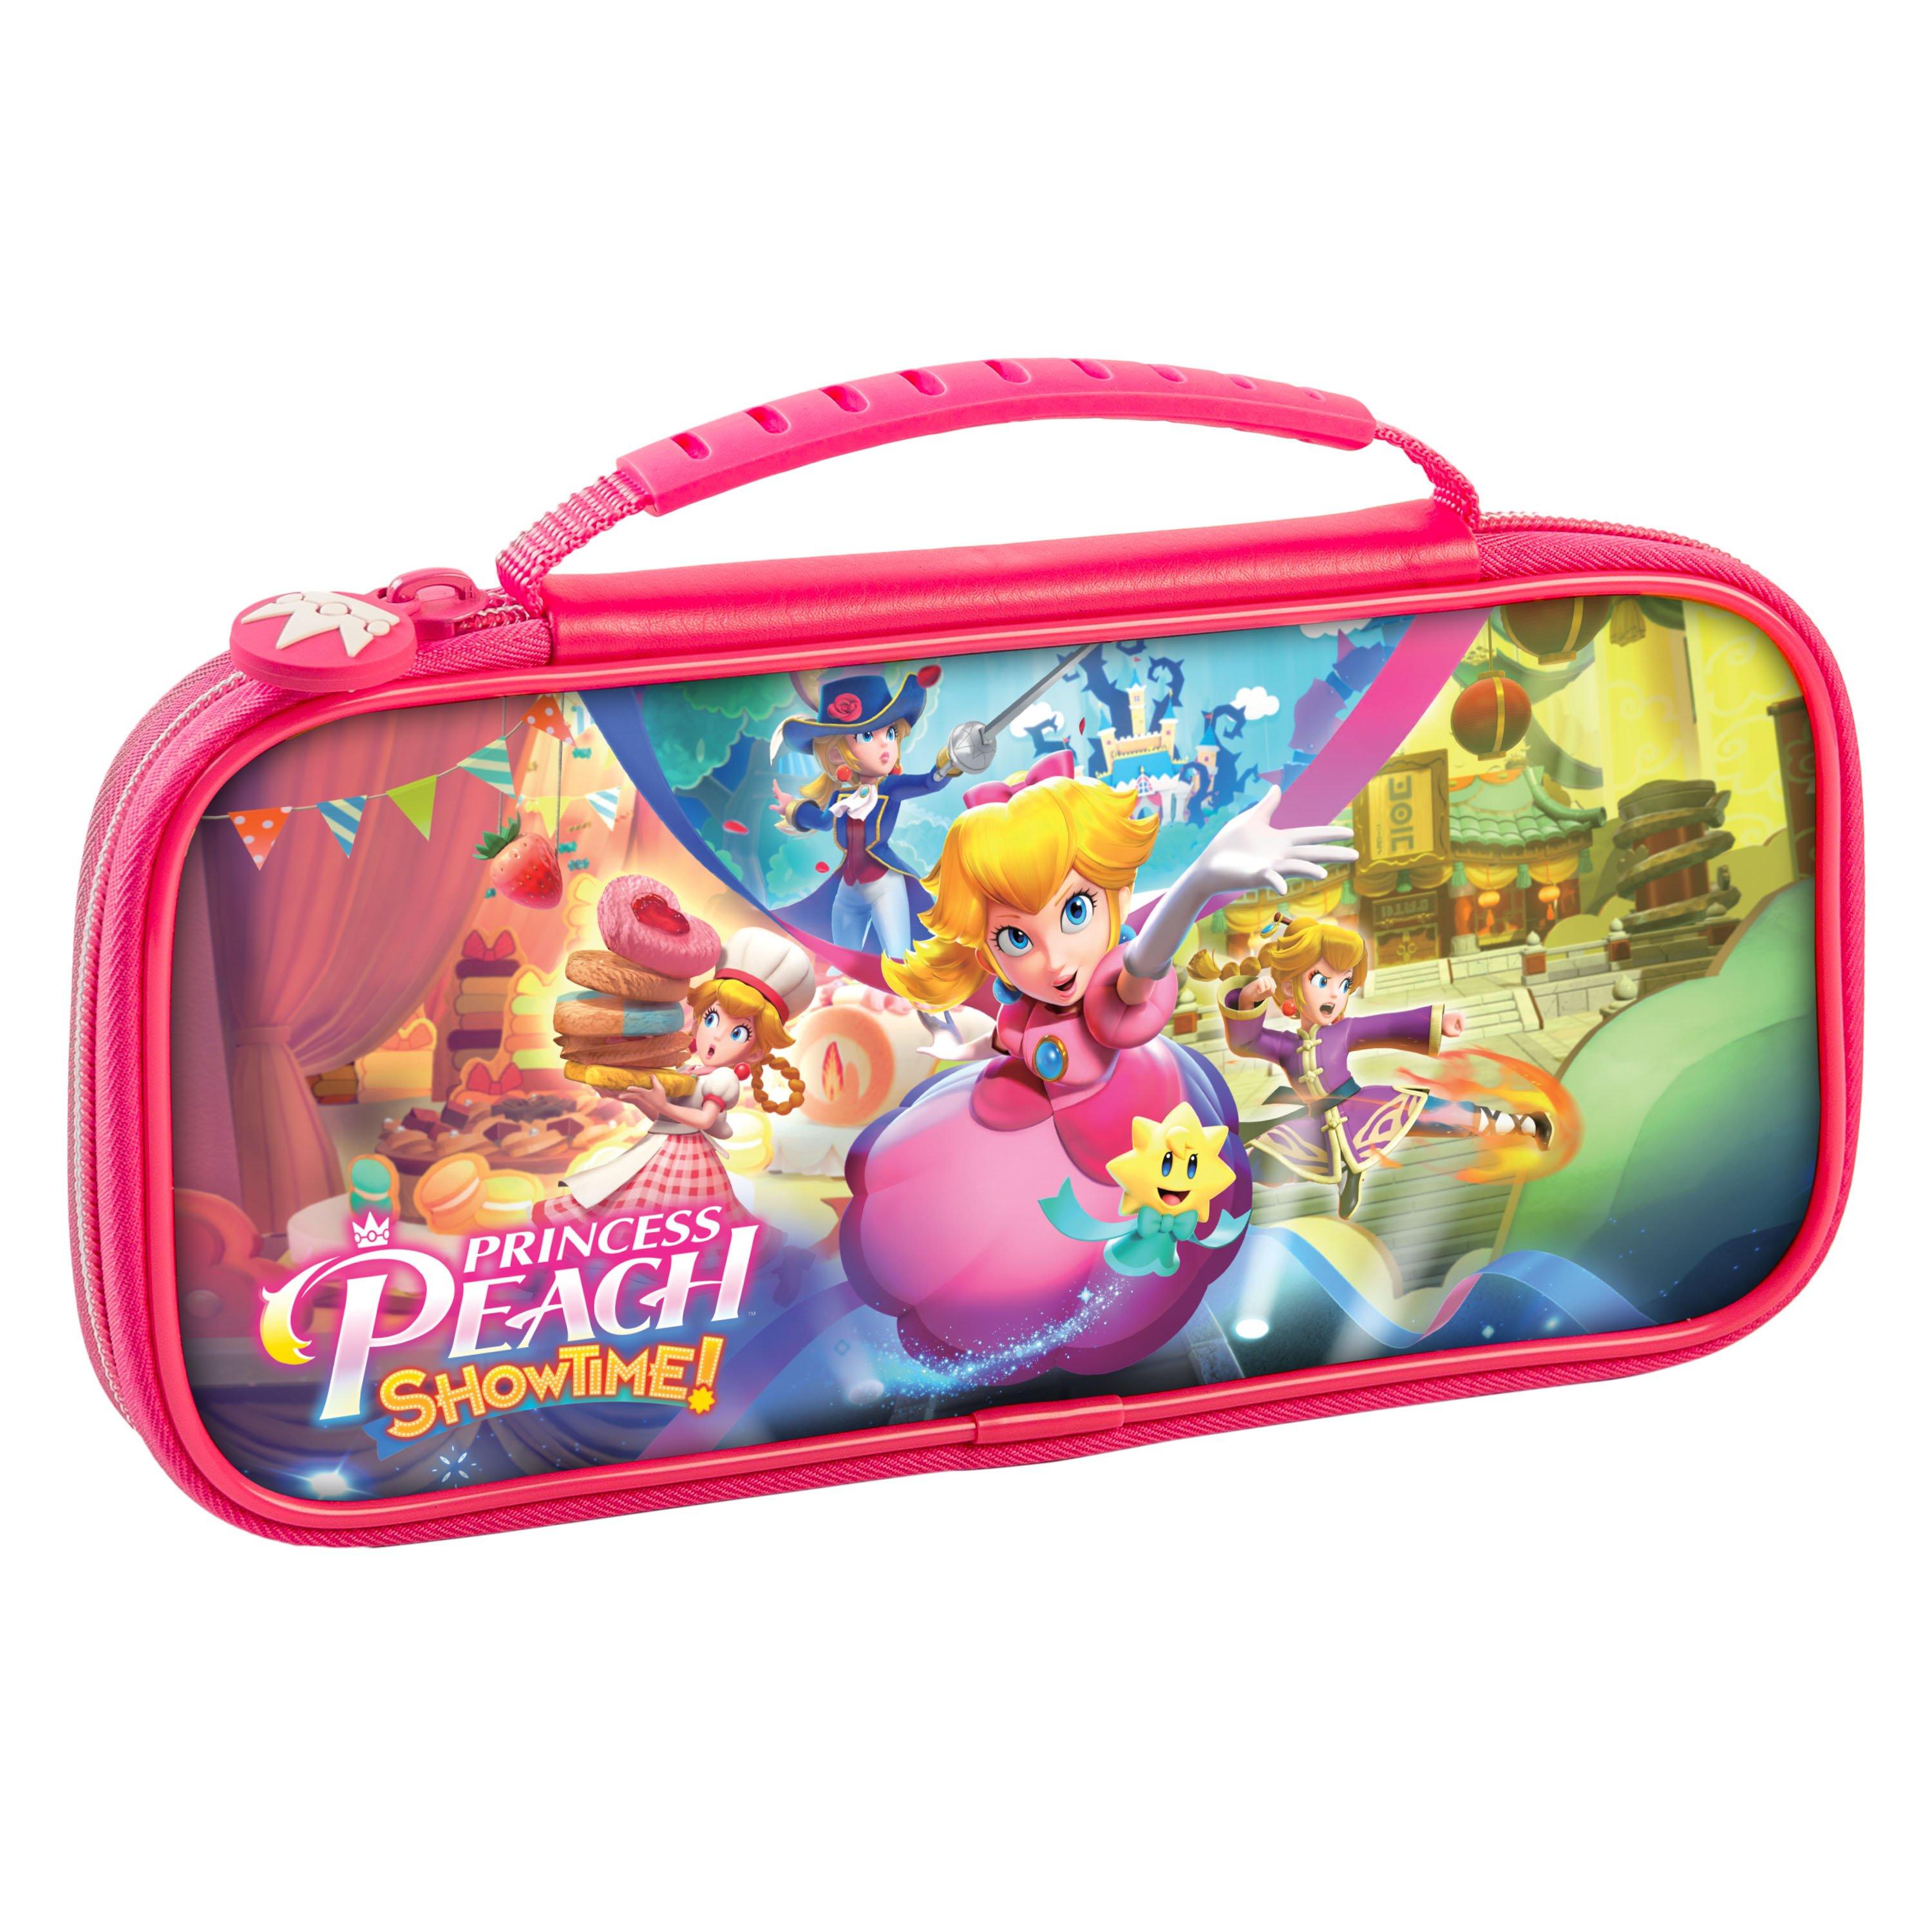 RDS Industries Nintendo Switch Game Traveler Deluxe Travel Case-Princess Peach Showtime